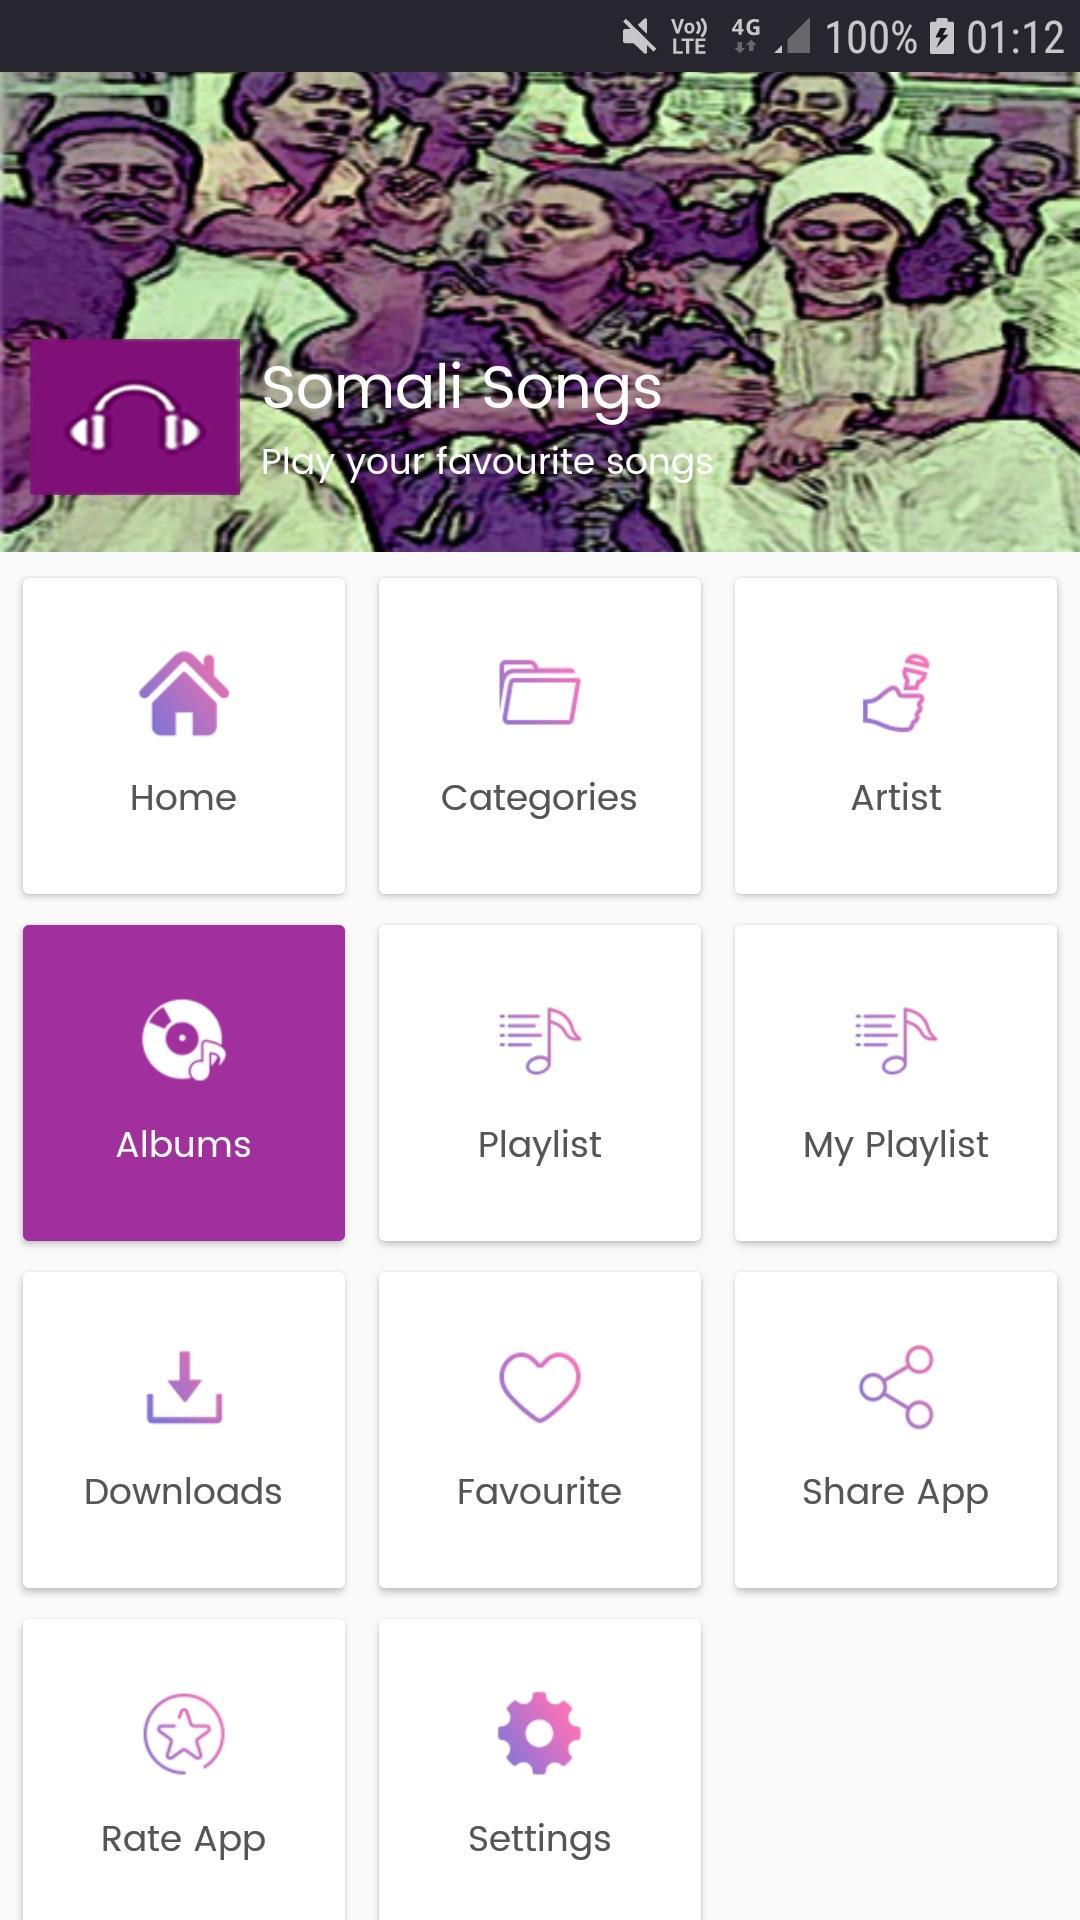 Somali Songs for Android - APK Download